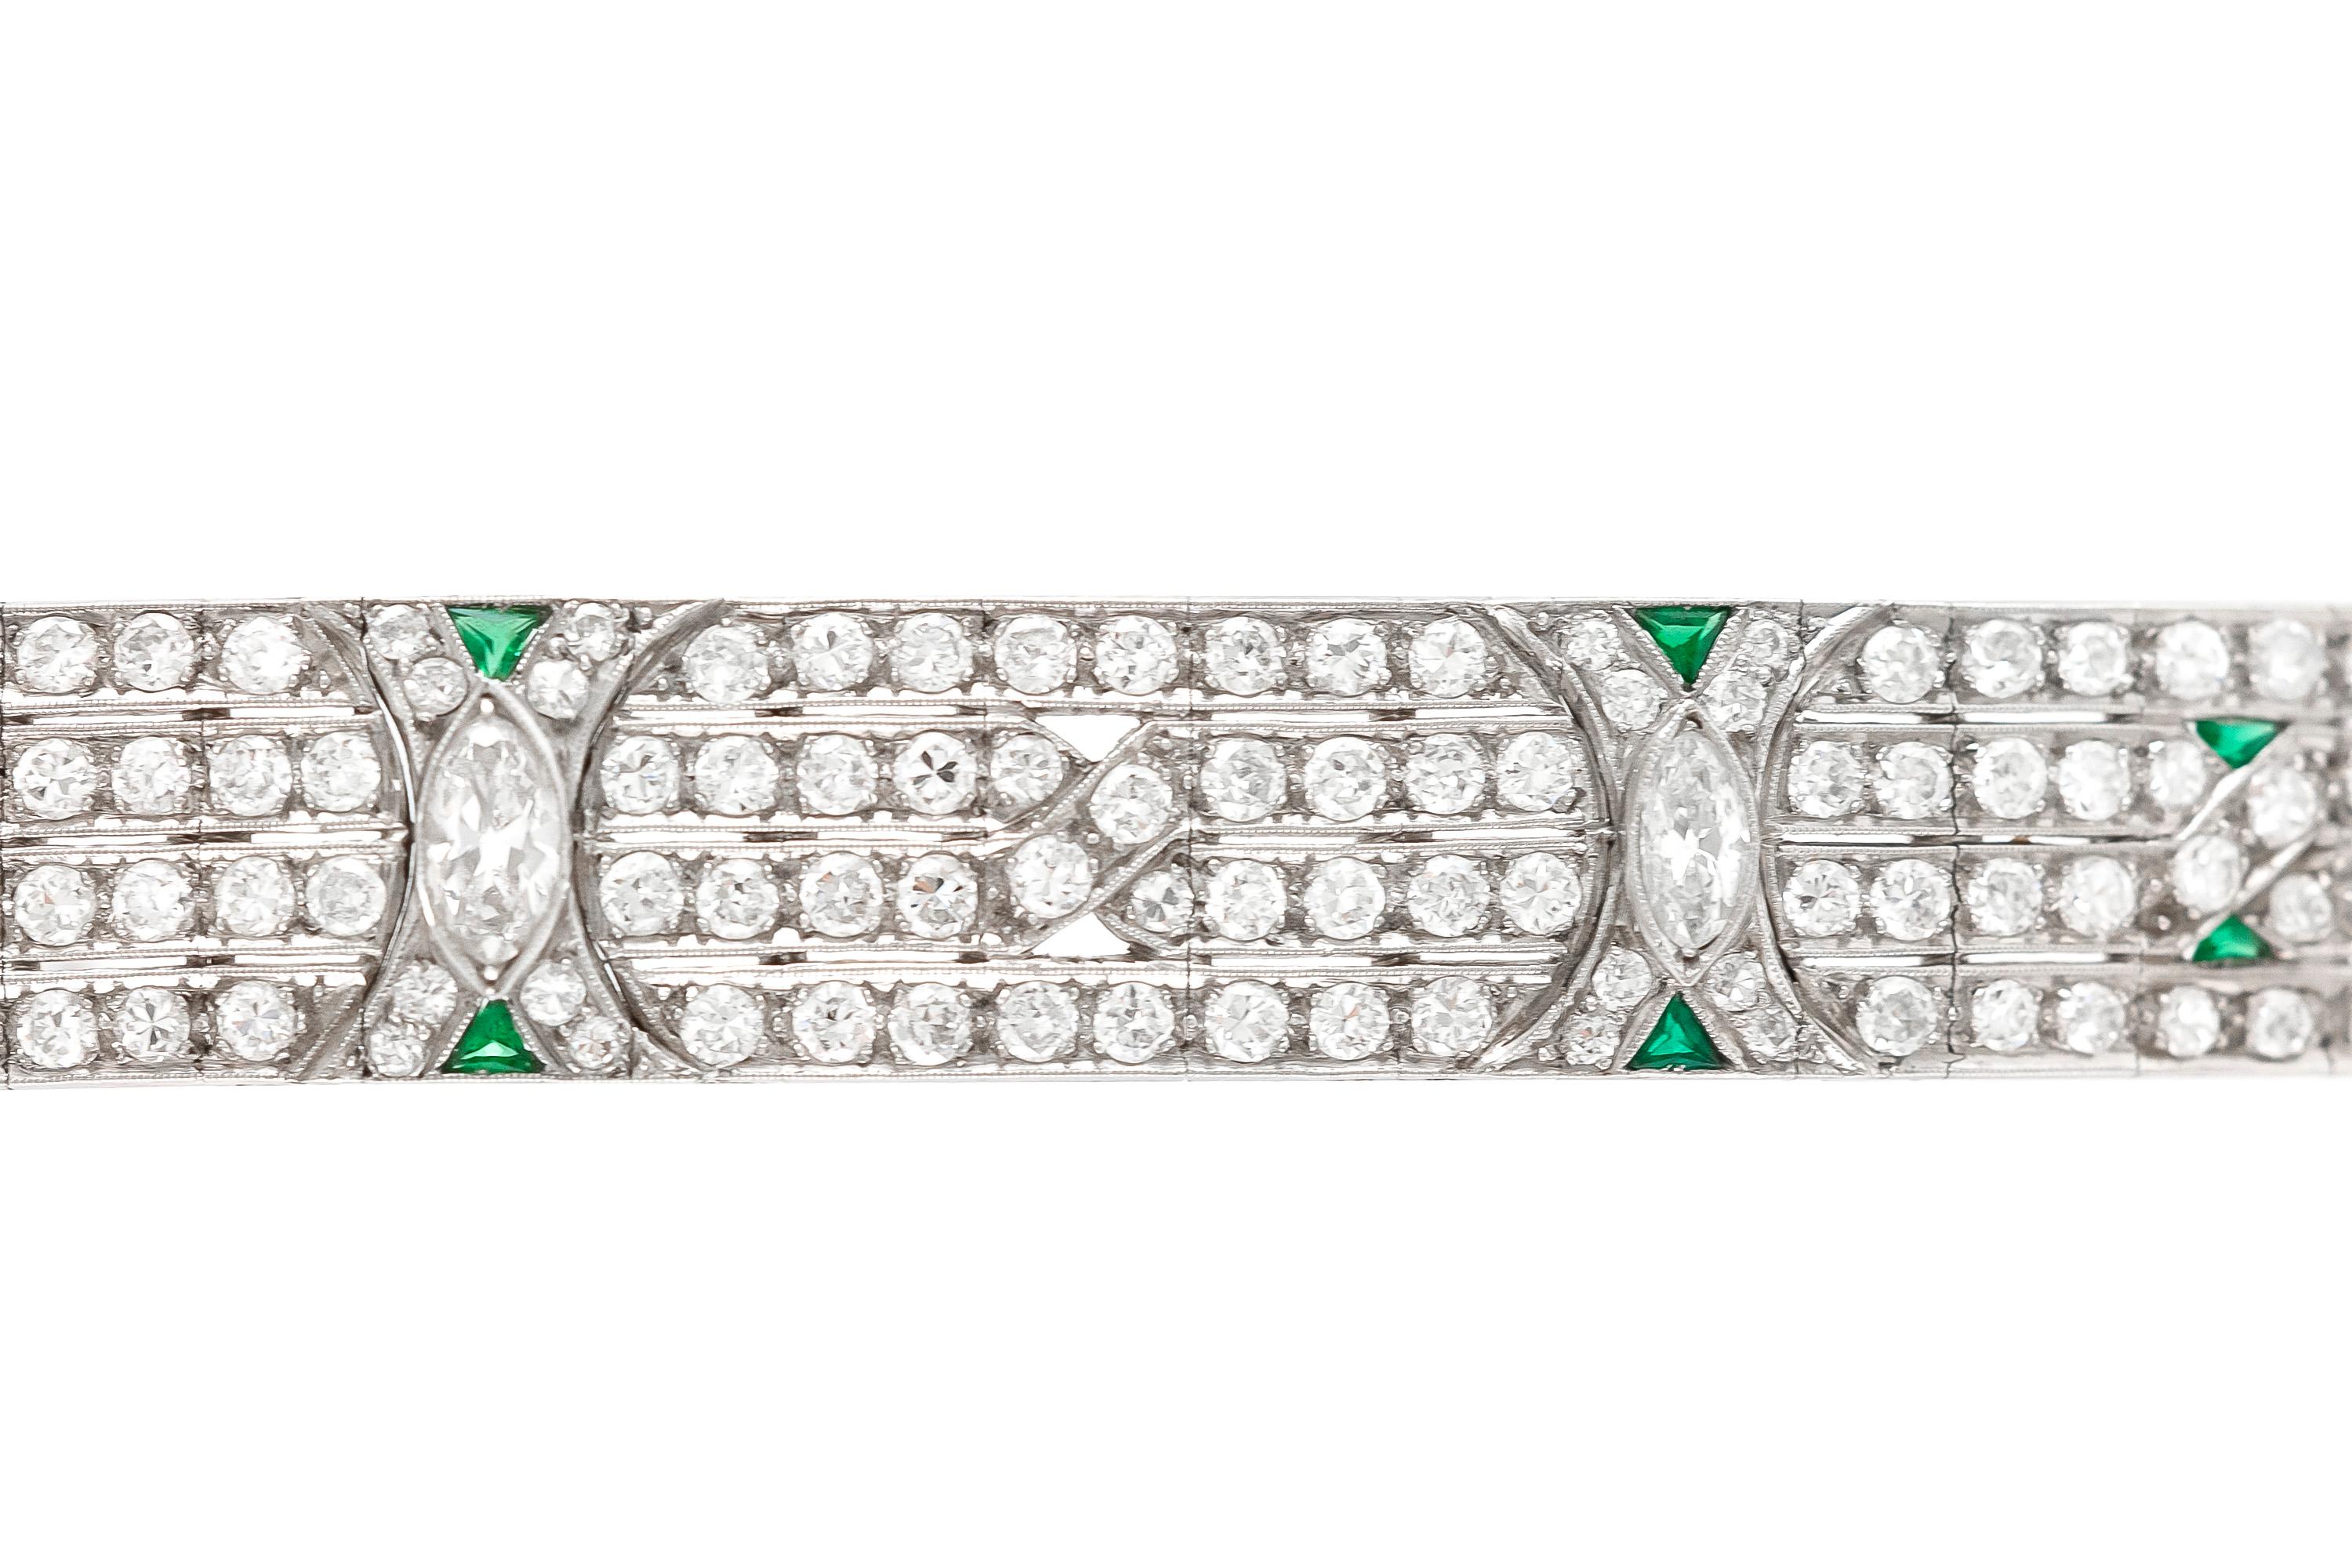 The bracelet is finely crafted in platinum with emeralds and diamonds weighing approximately total of 18.00 carat.
Circa 1920.
Easy to reasize if neede.